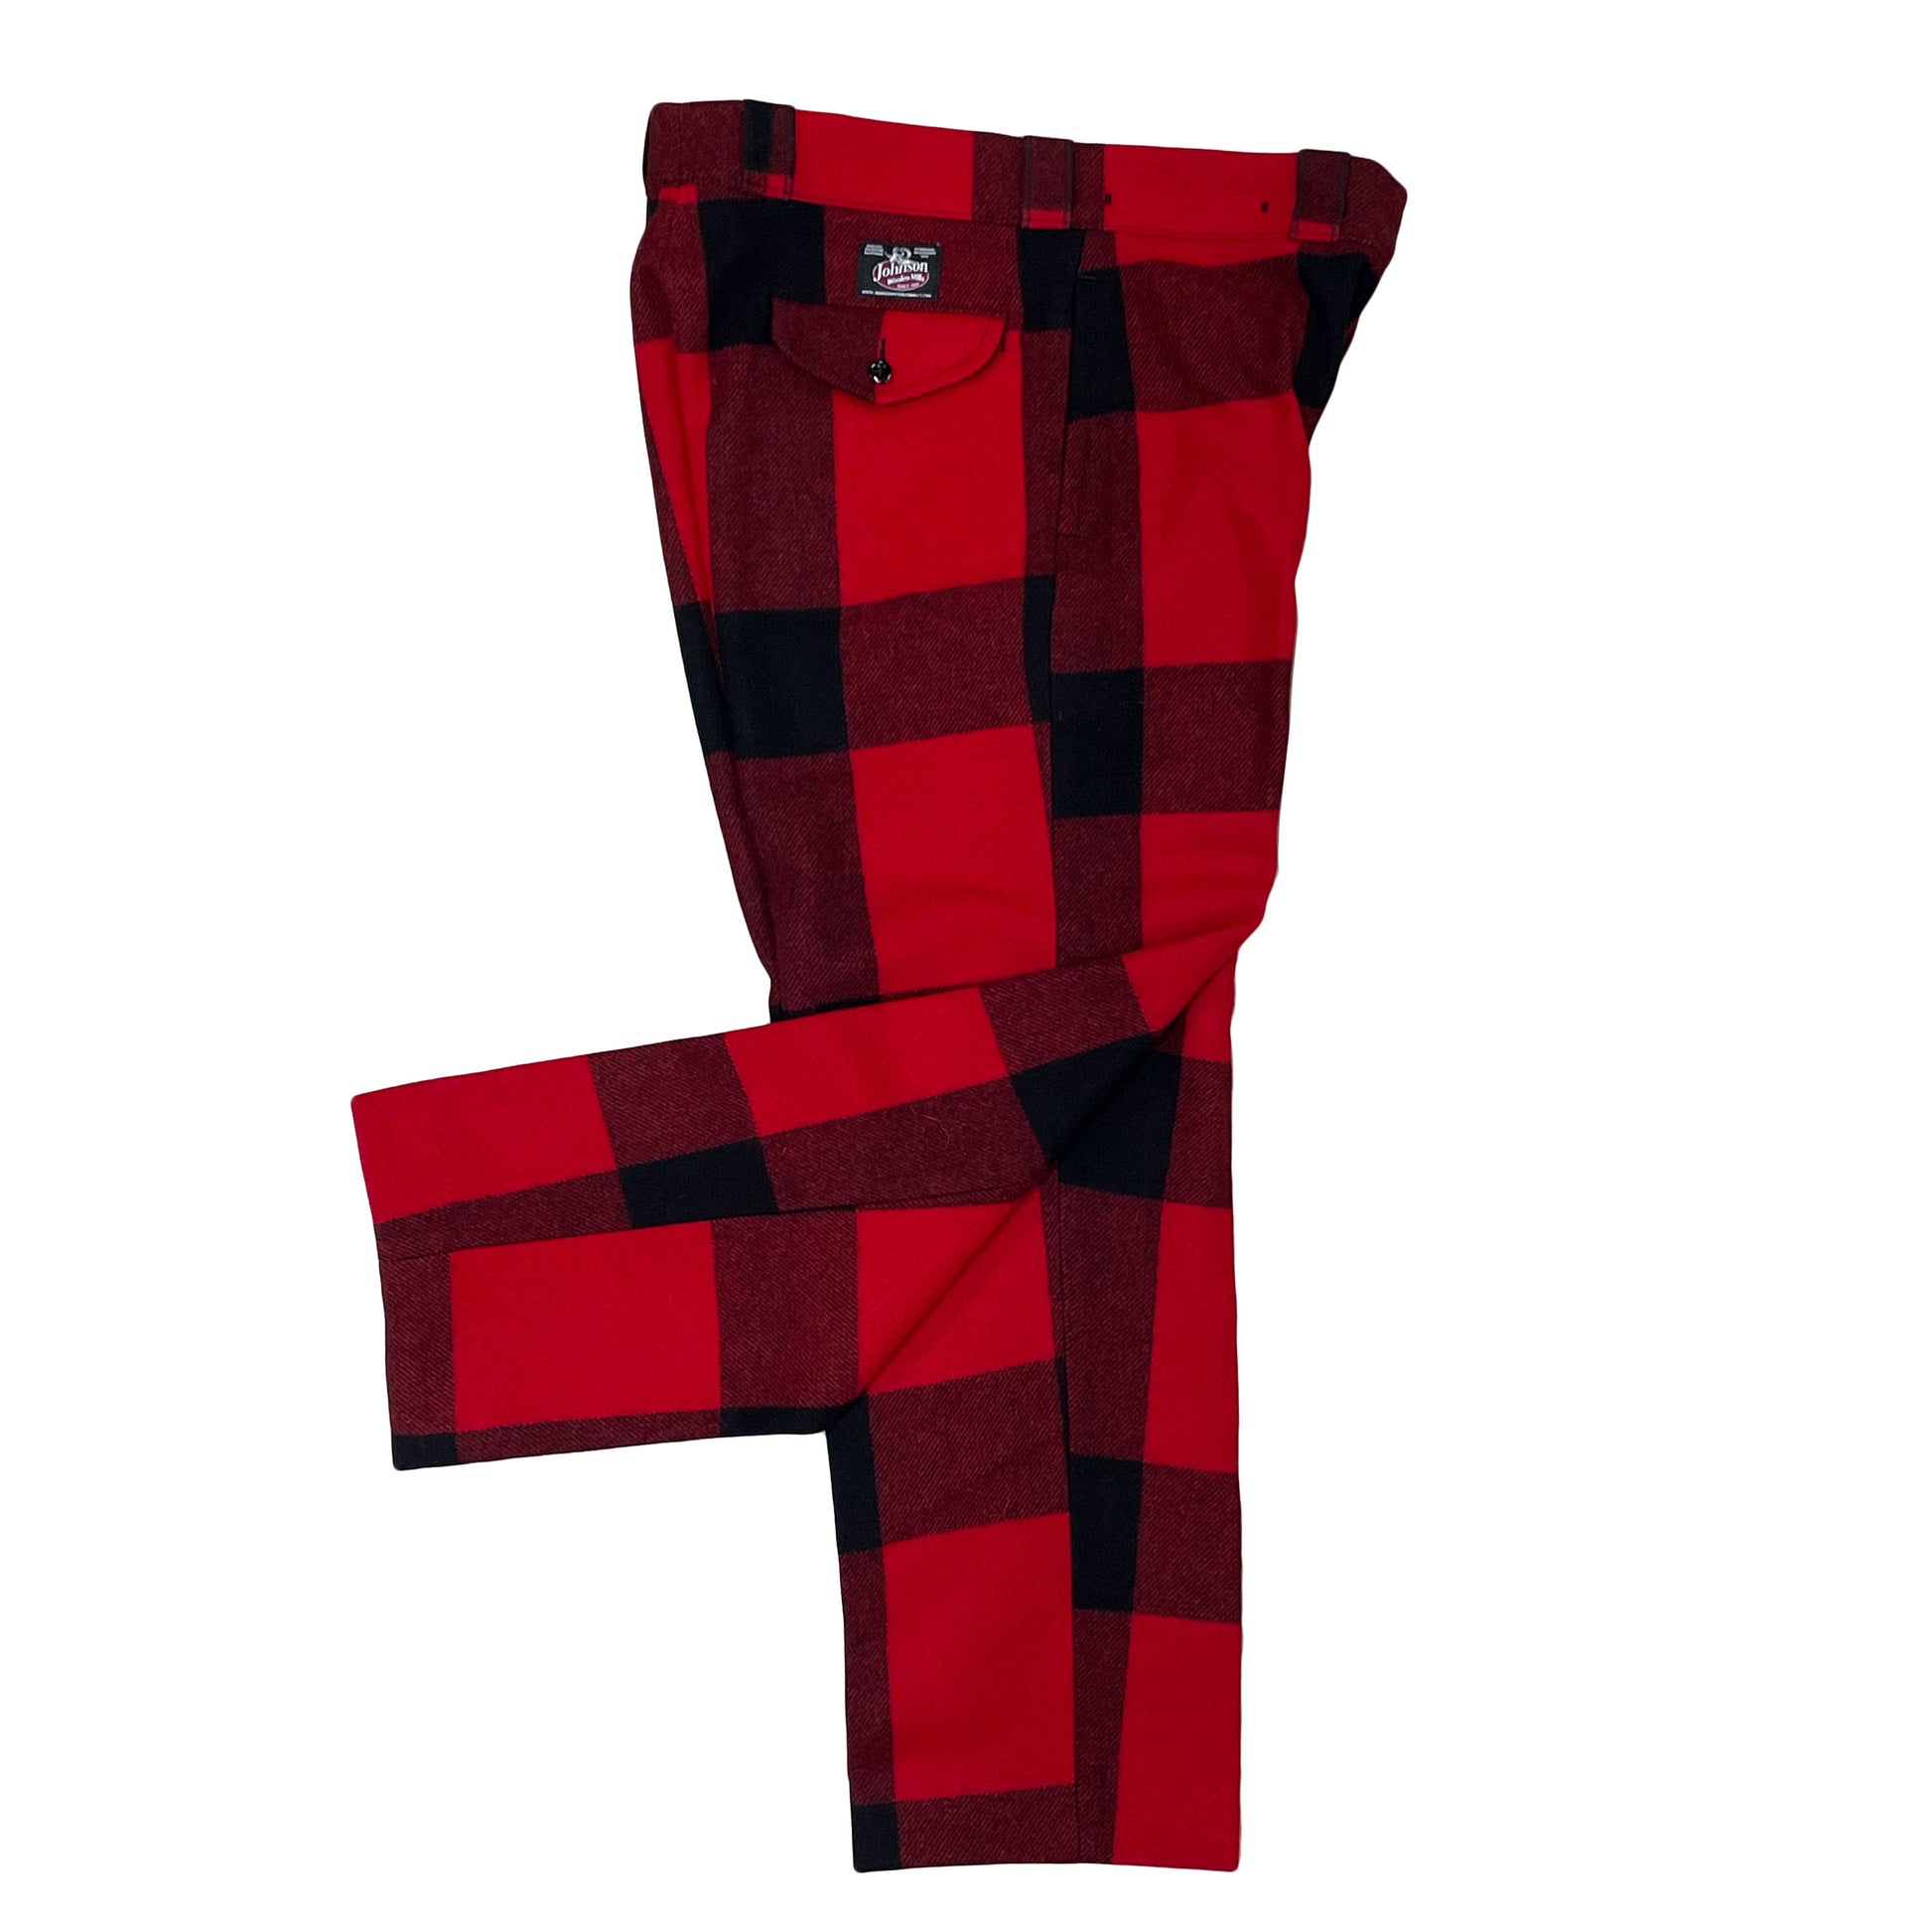 Traditional Wool unlined Pants, red & black squares, belted loop, button & fly zipper, two front & back pockets, side view